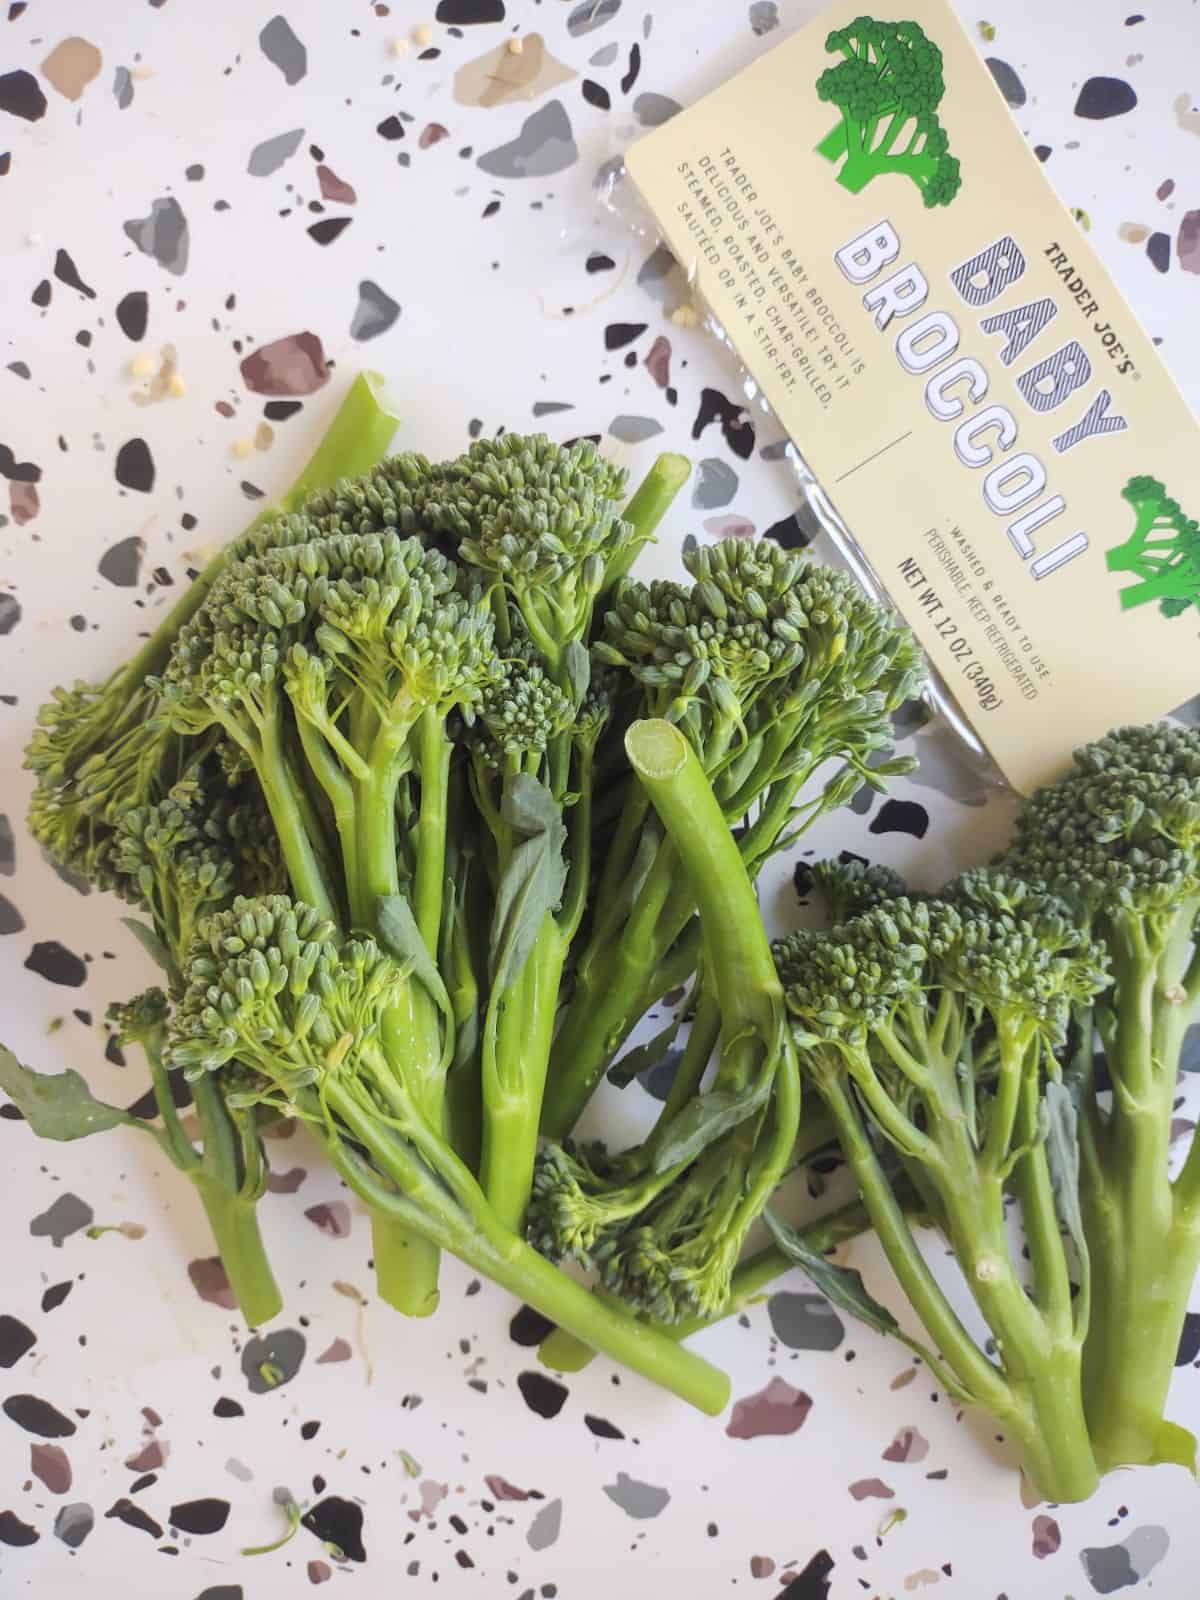 Baby broccoli from Trader Joe's sitting on a white table with spots.